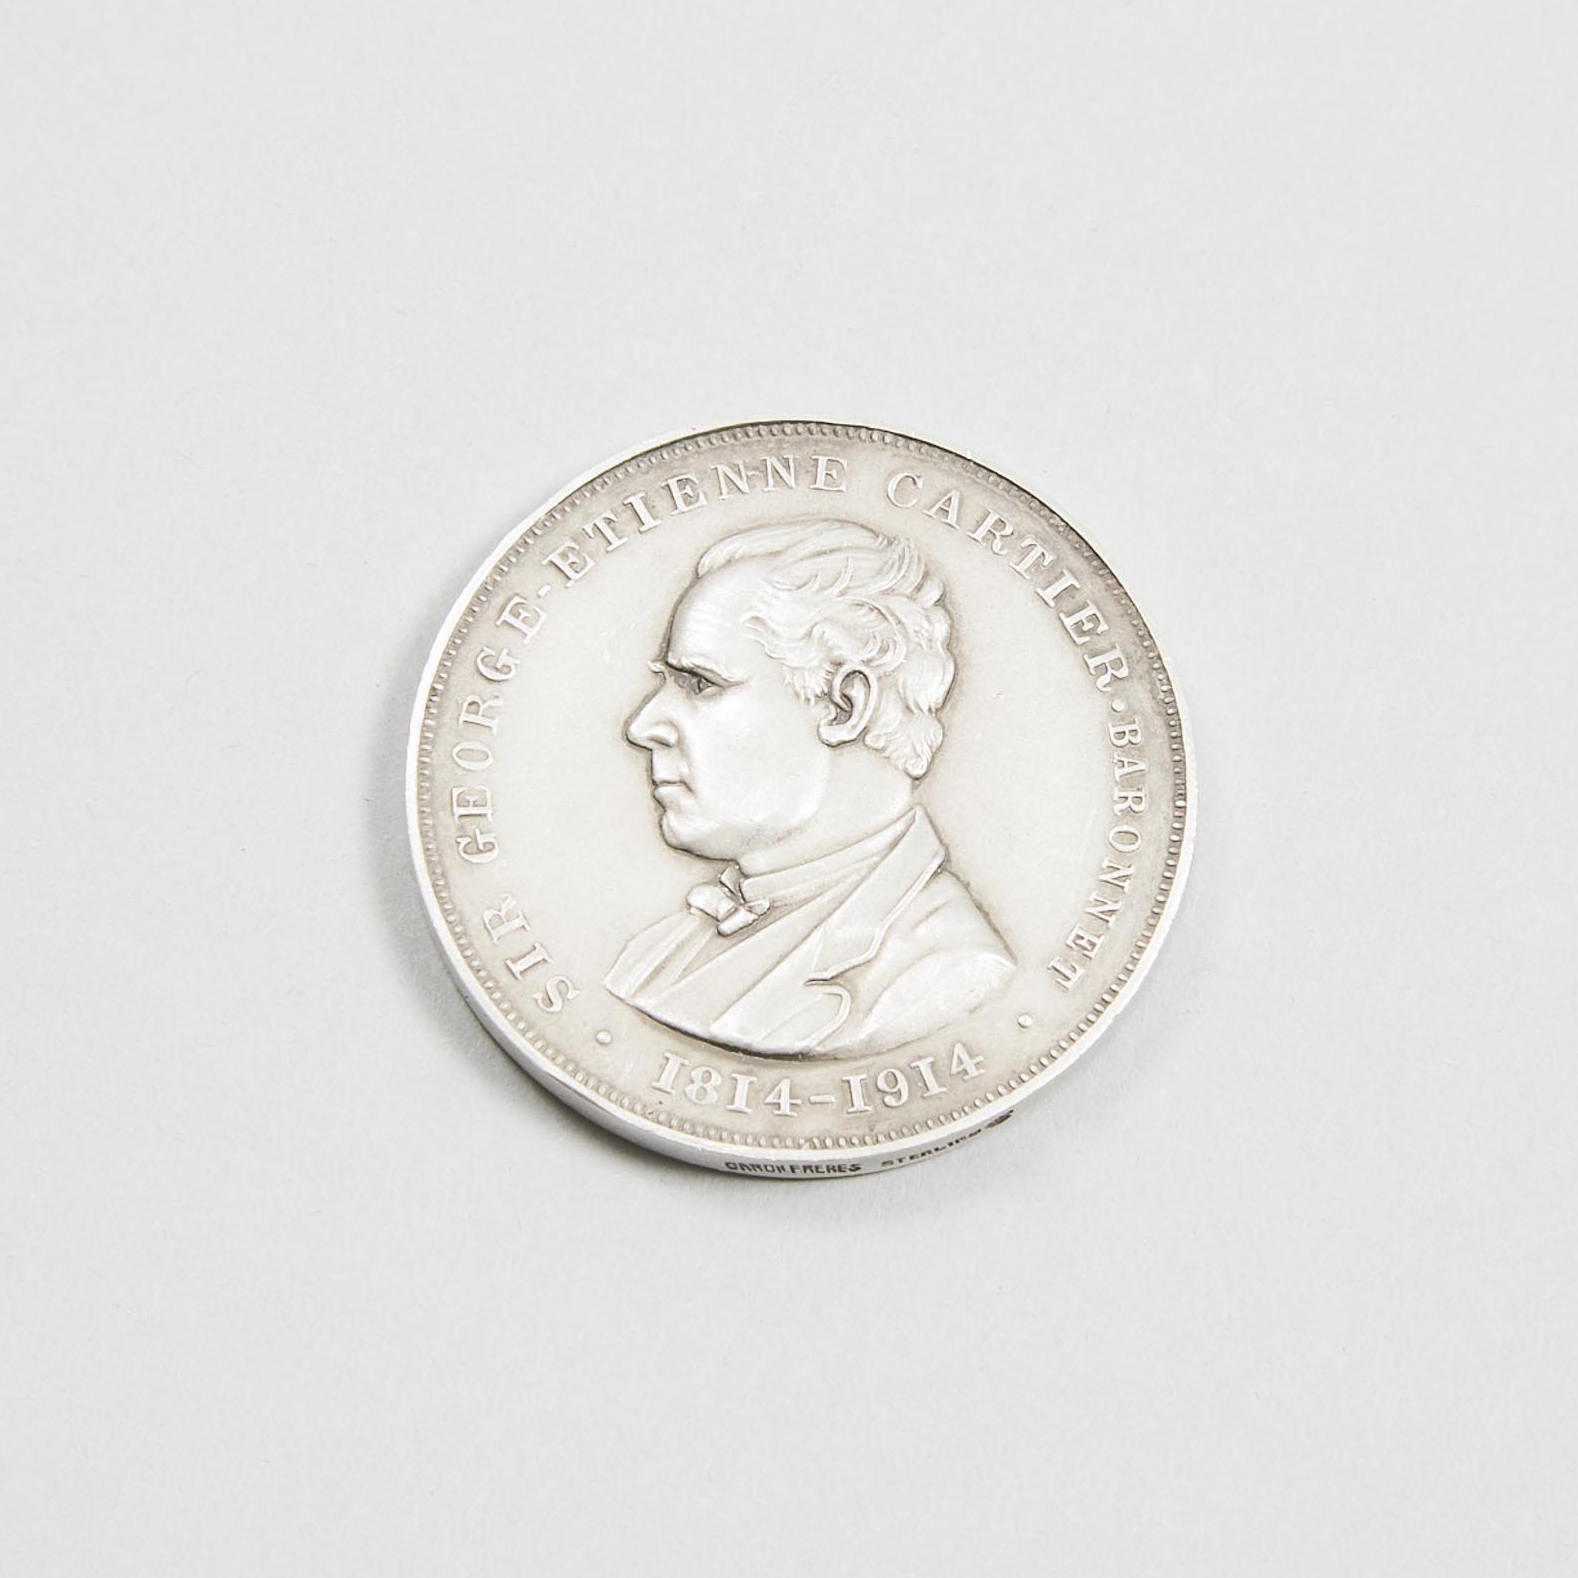 Canadian Silver Medallion Commemorating the 100th Anniversary of the Birth of George-Étienne Cartier, 1914
